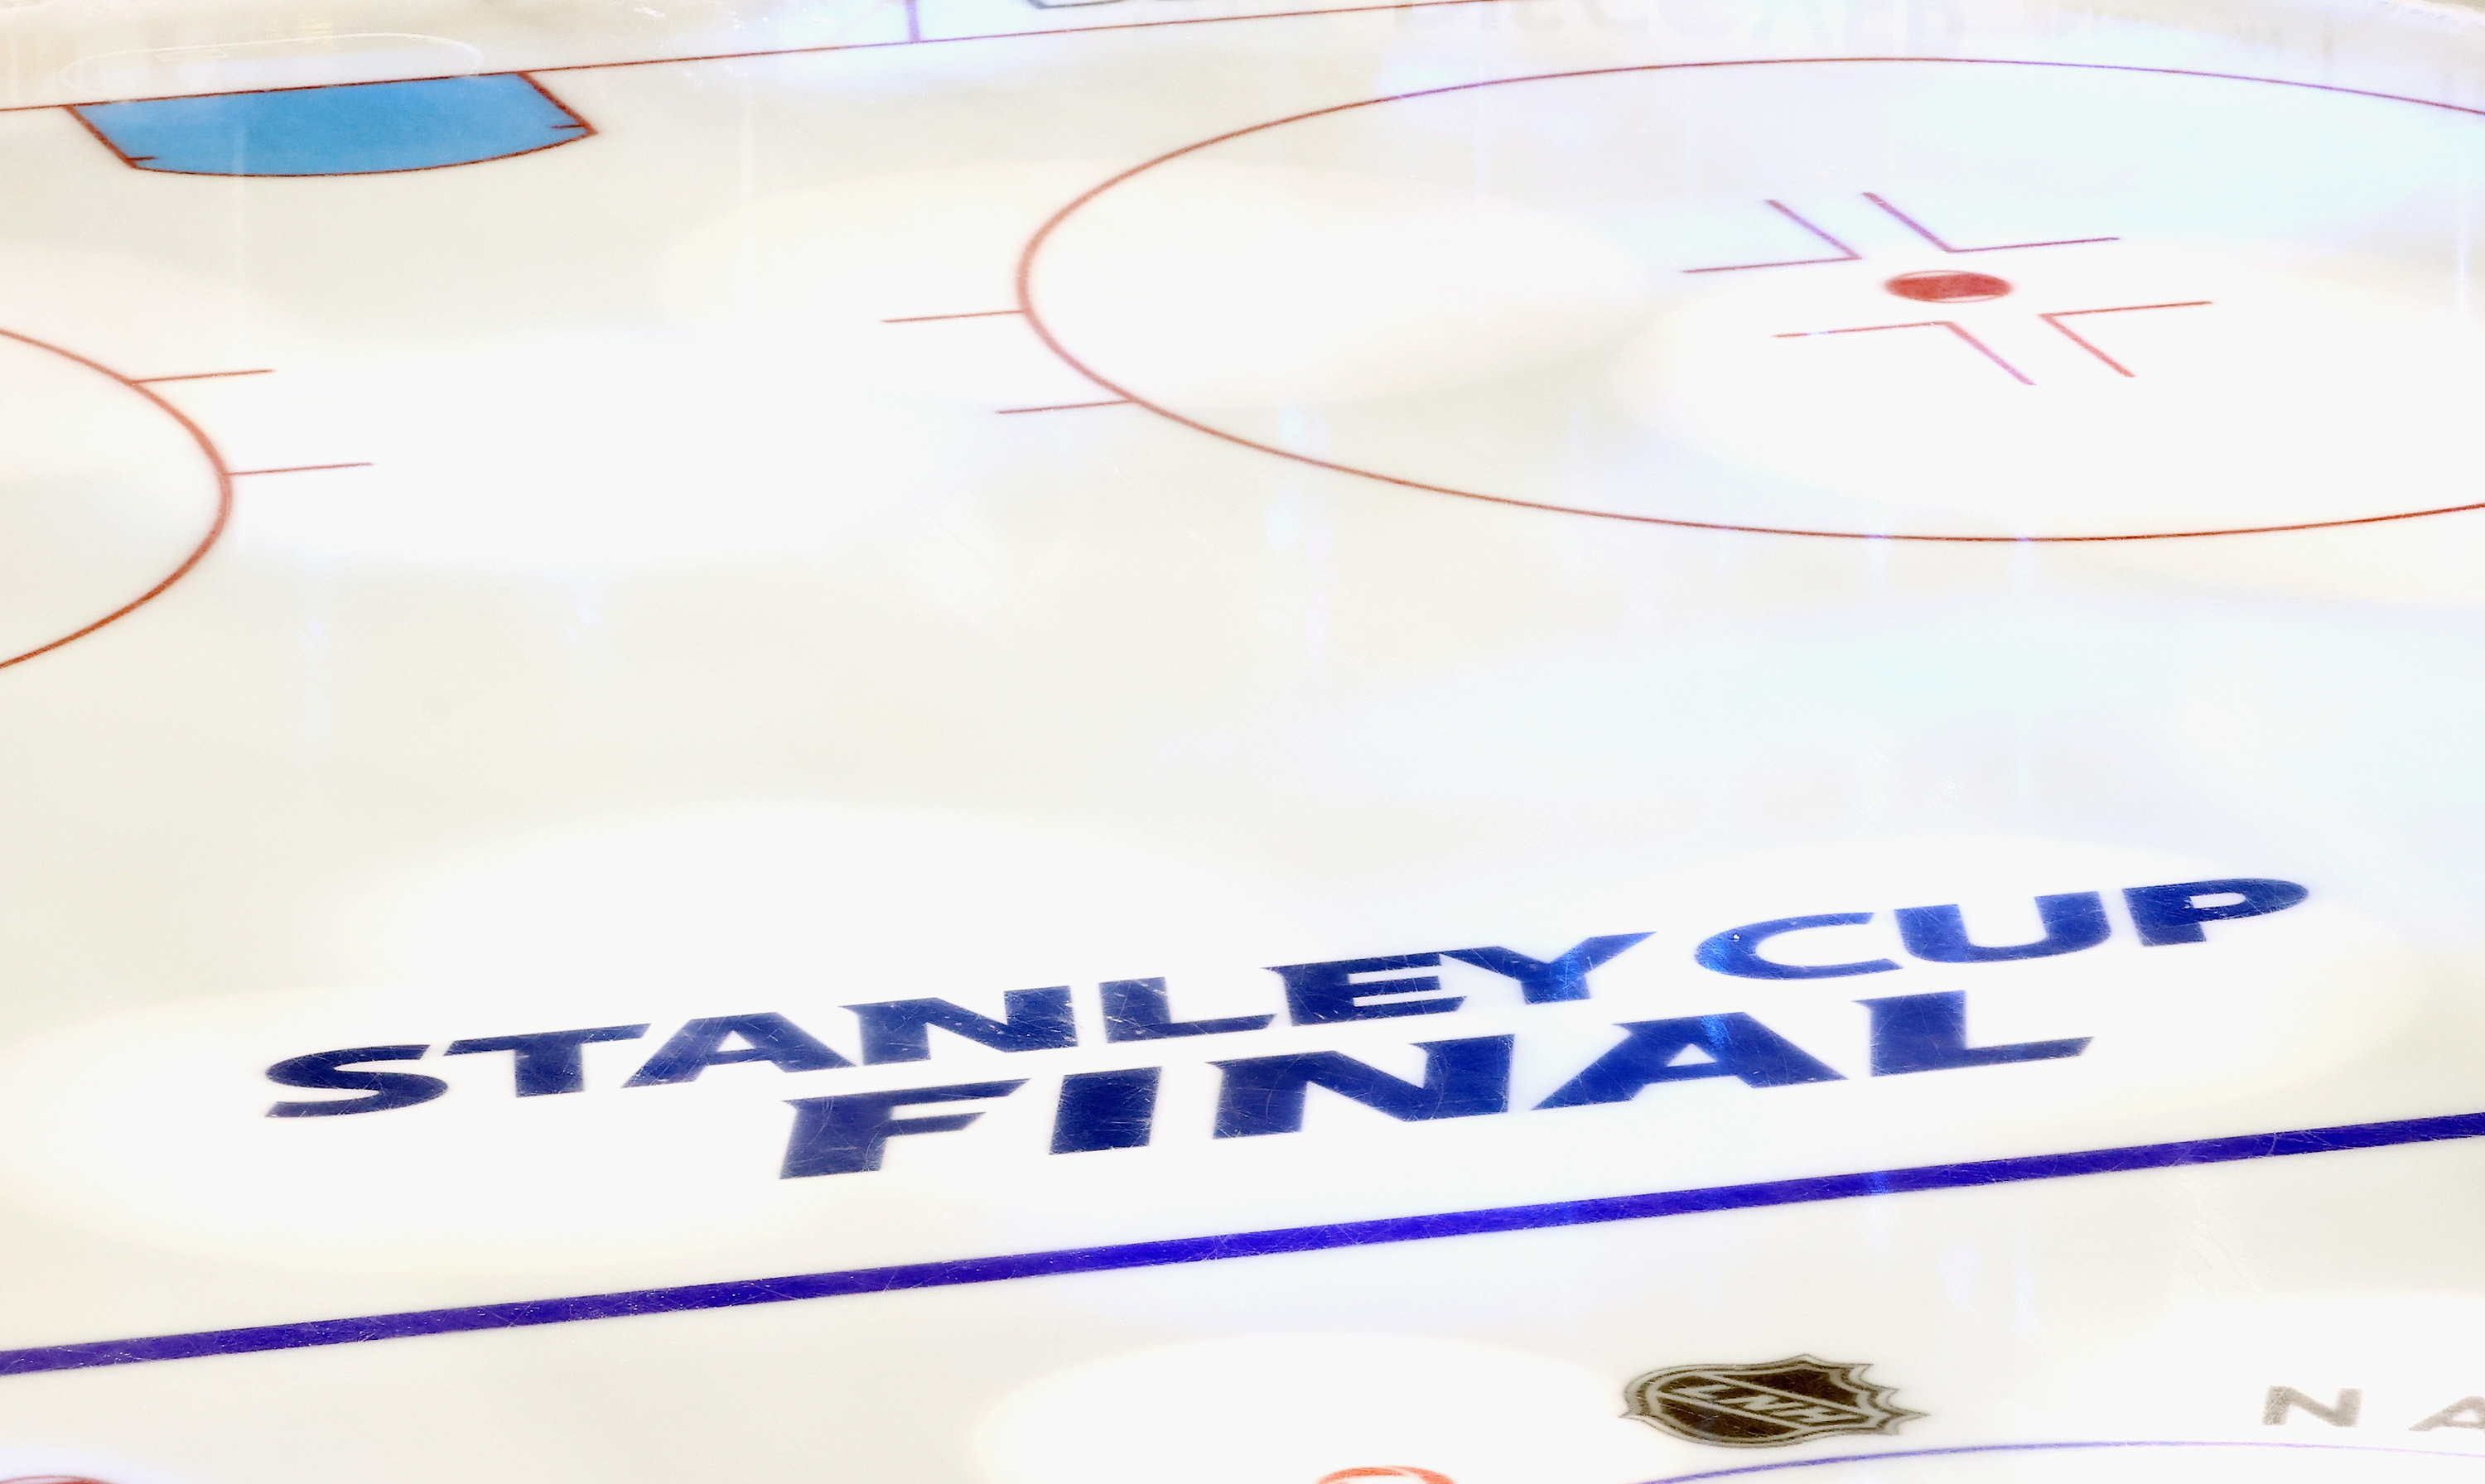 2020 NHL Stanley Cup Final - Game One